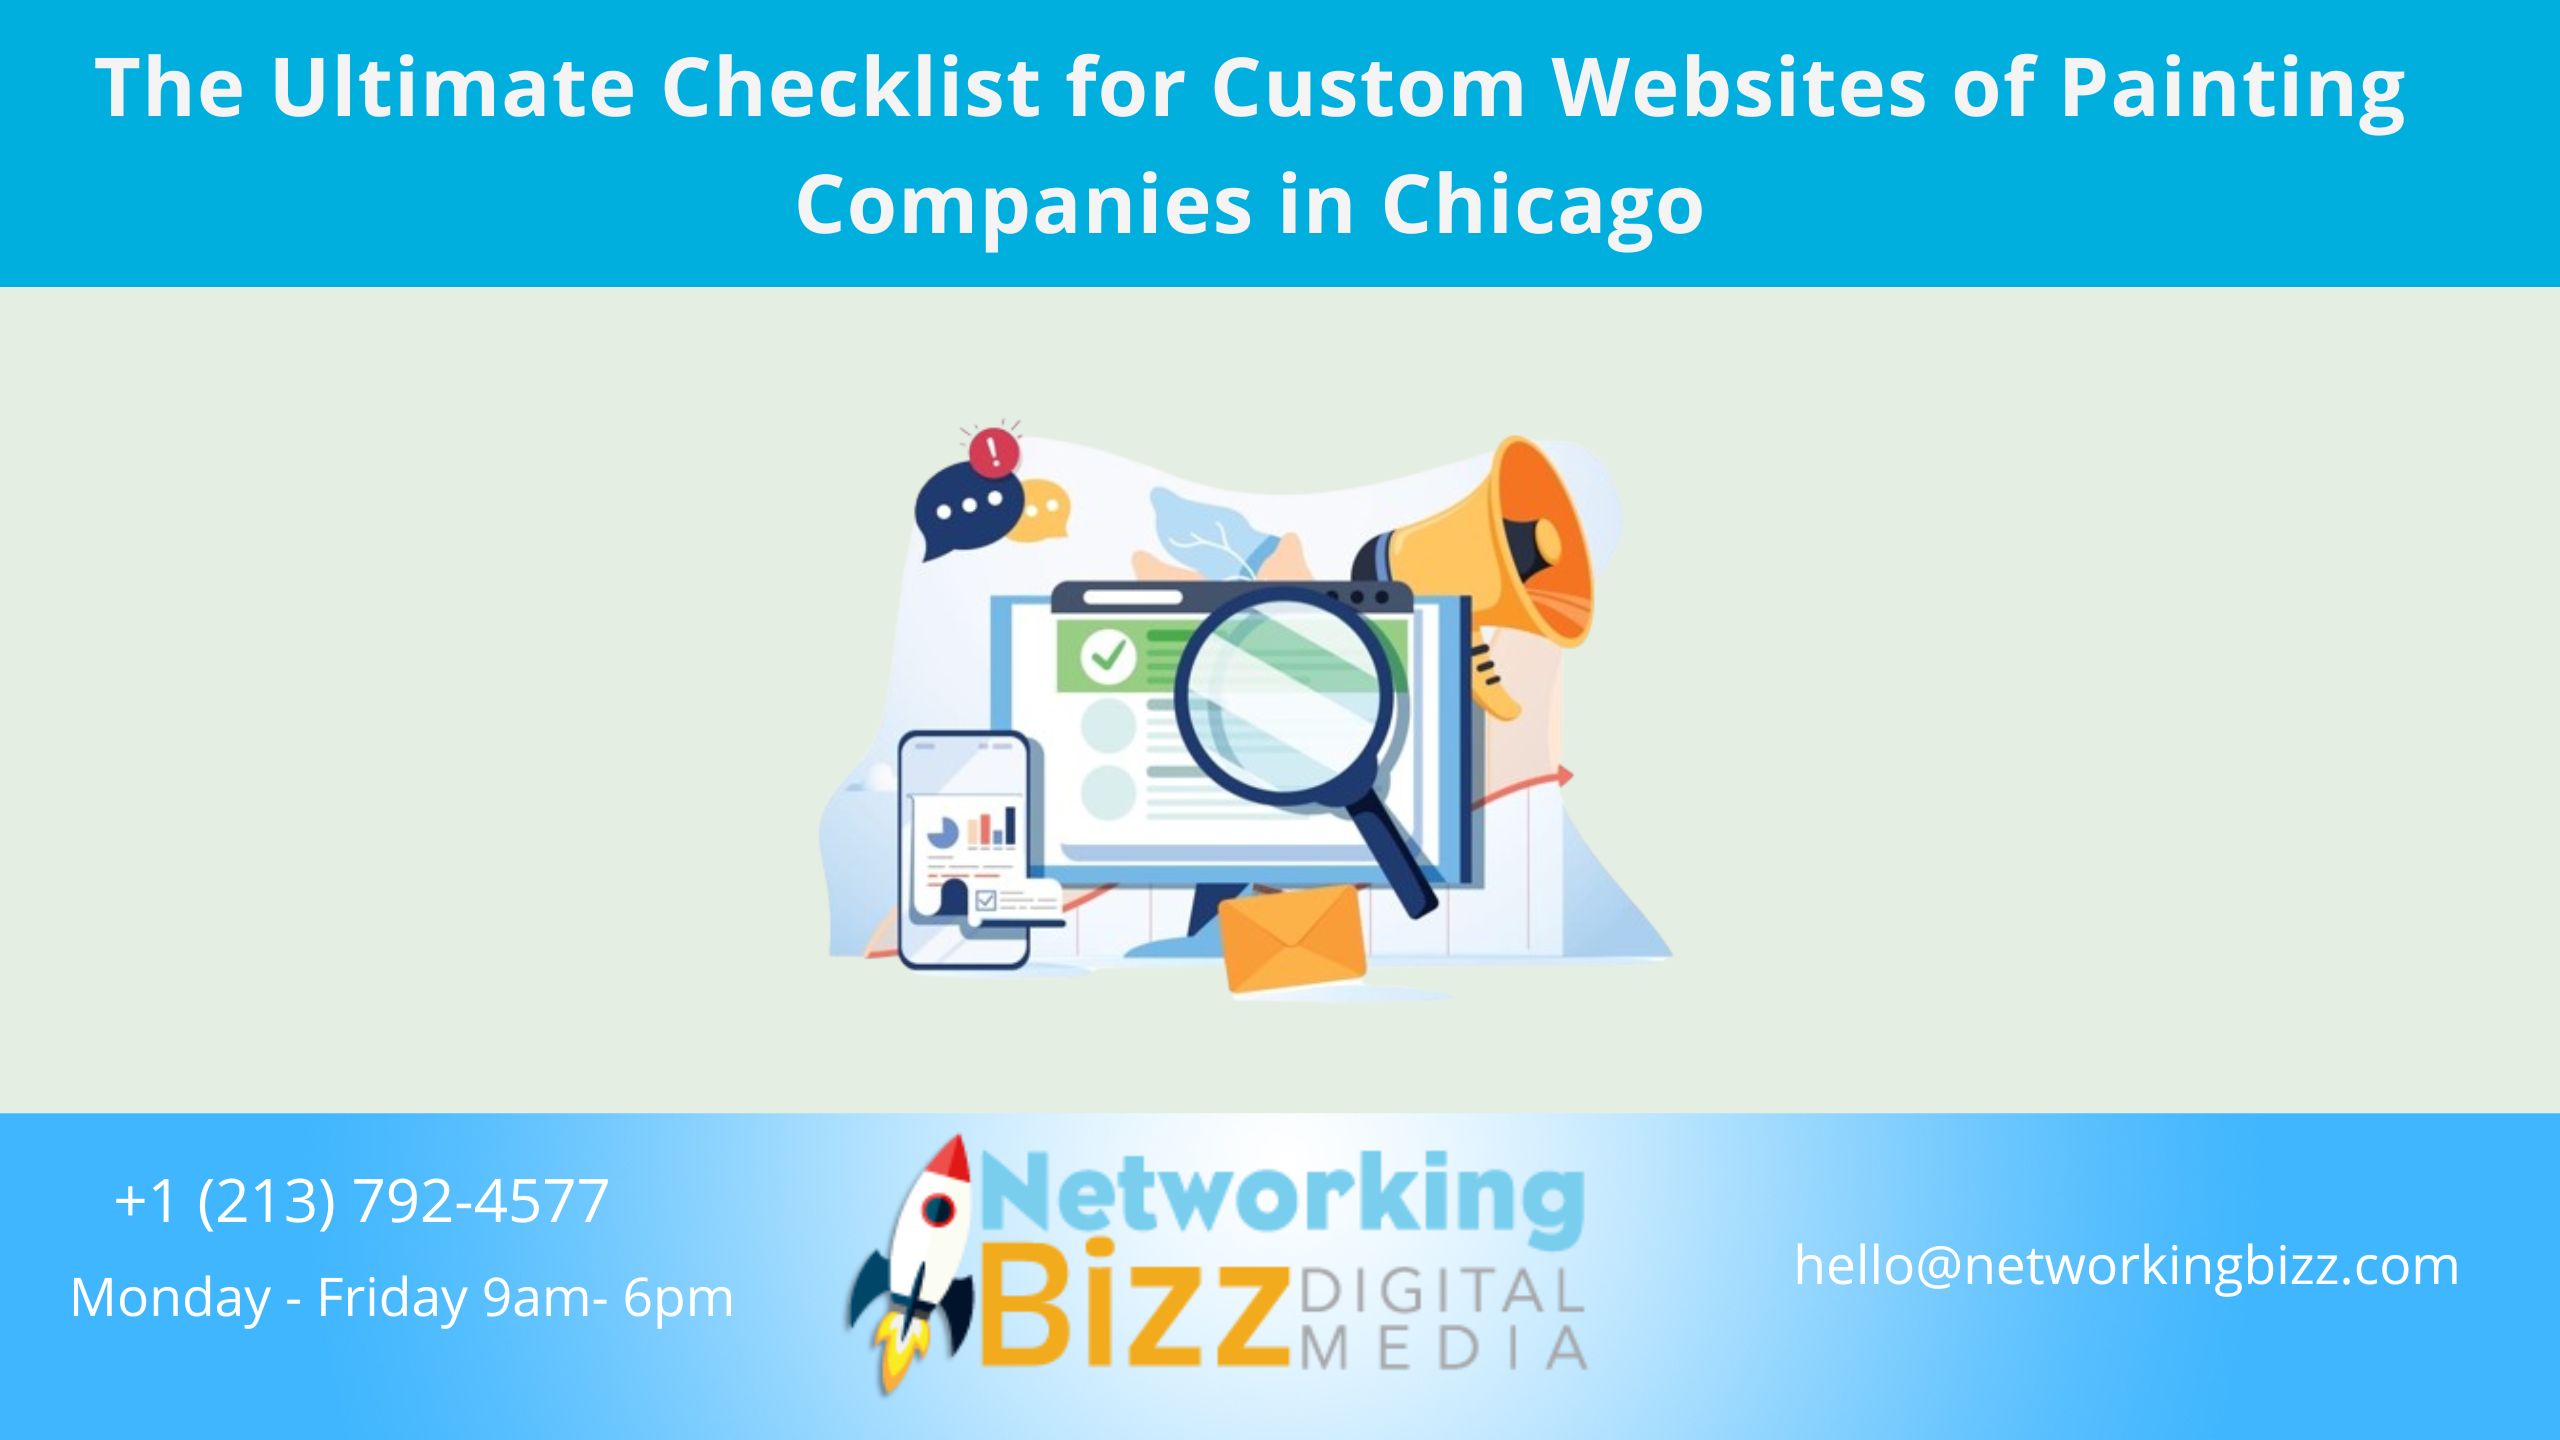 The Ultimate Checklist for Custom Websites of Painting Companies in Chicago